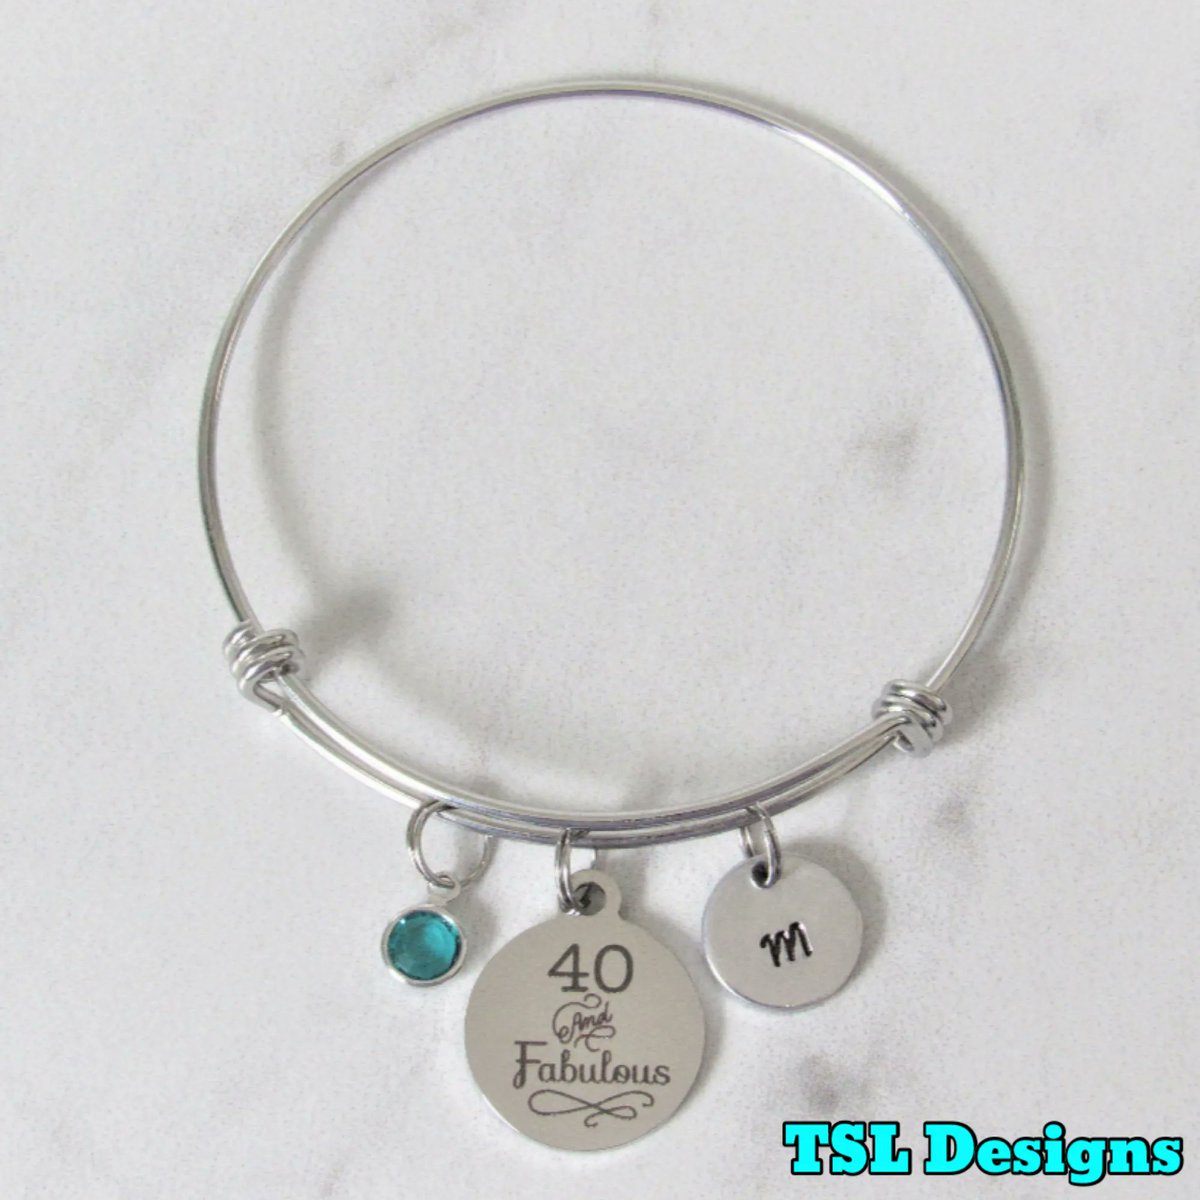 70 & Sensational Bracelet with Initial Personalized Disk and Swarovski Birthstone Crystal
buff.ly/3o1pbTG
#bracelet #banglebracelet #charmbracelet #handmade #jewelry #handcrafted #shopsmall #etsy #etsyhandmade #etsyjewelry #70thbirthday #70andsensational #birthdaygift